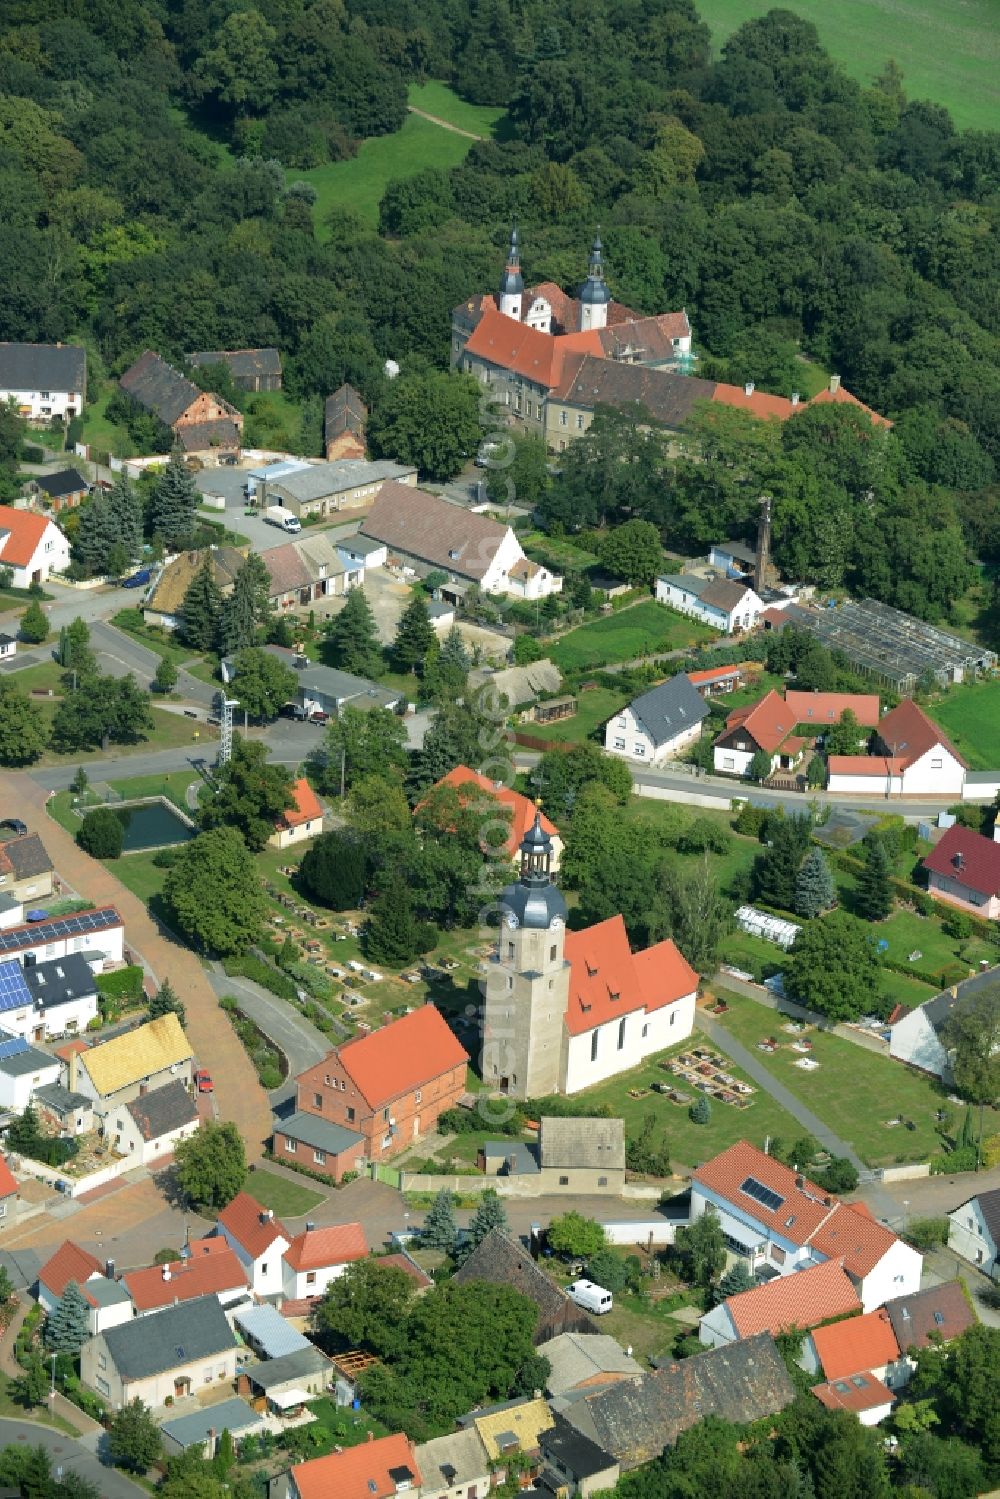 Aerial photograph Zschepplin - View of the borough of Zschepplin in the state of Saxony. The borough is located in the county district of North Saxony, surrounded by hills and fields and consists of residential buildings. The church St.Lucia is located in its centre and Castle Zschepplin on the edge of the borough